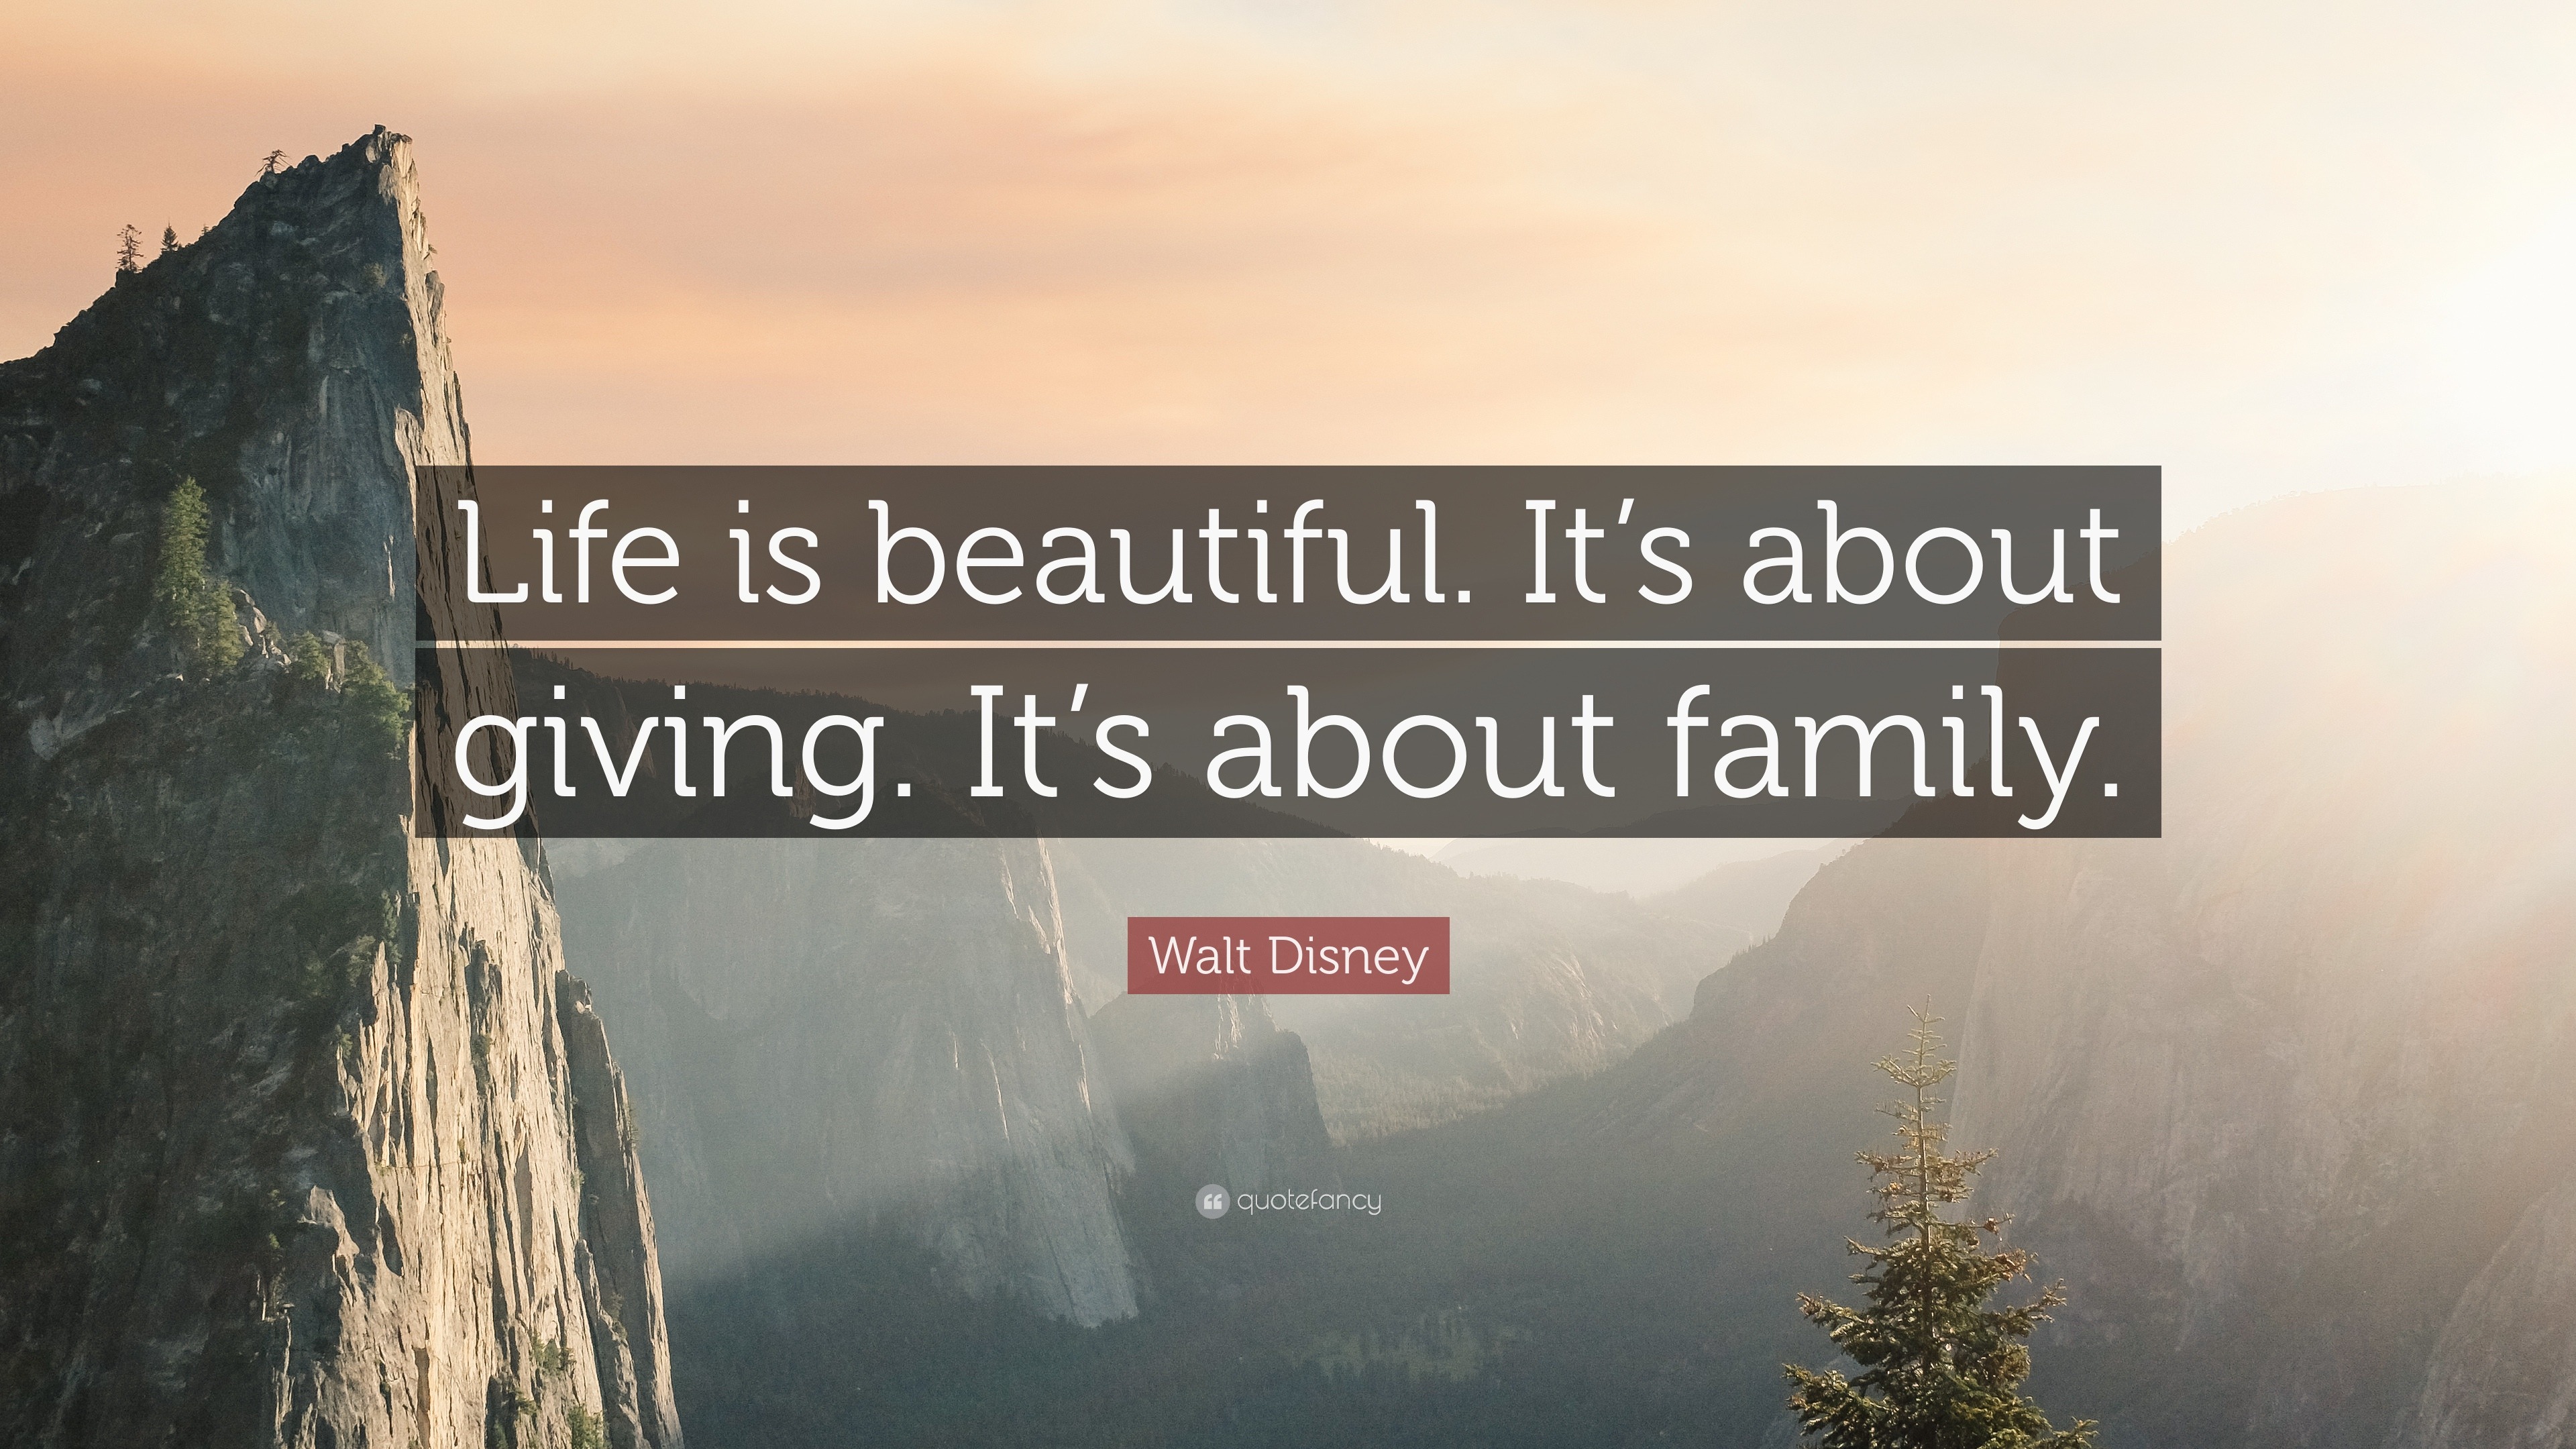 Walt Disney Quote “Life is beautiful It s about giving It s about family